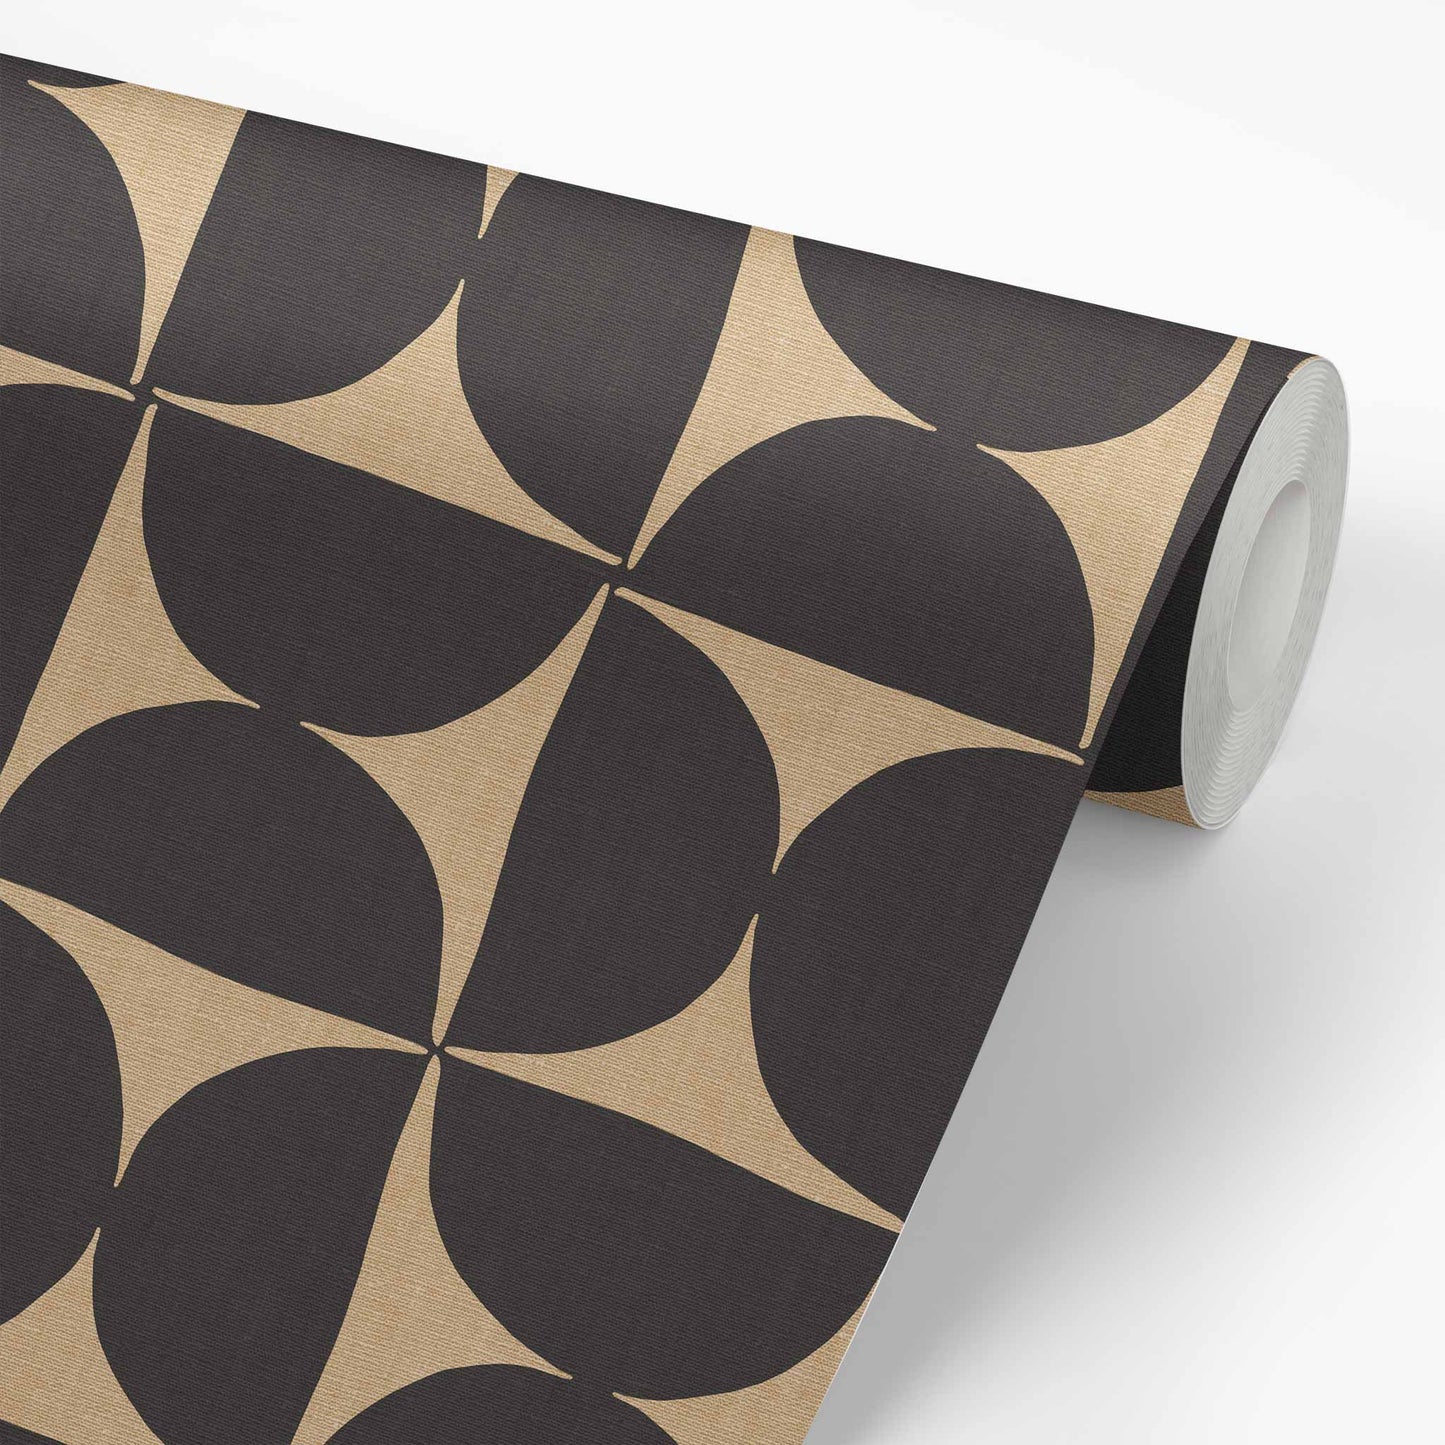 Get yourself these stylish Half Circle Tile Wallpapers for a unique wall decor solution. With its charcoal on beige design, these geometric wallpapers will easily liven up any room, making it look modern and chic.